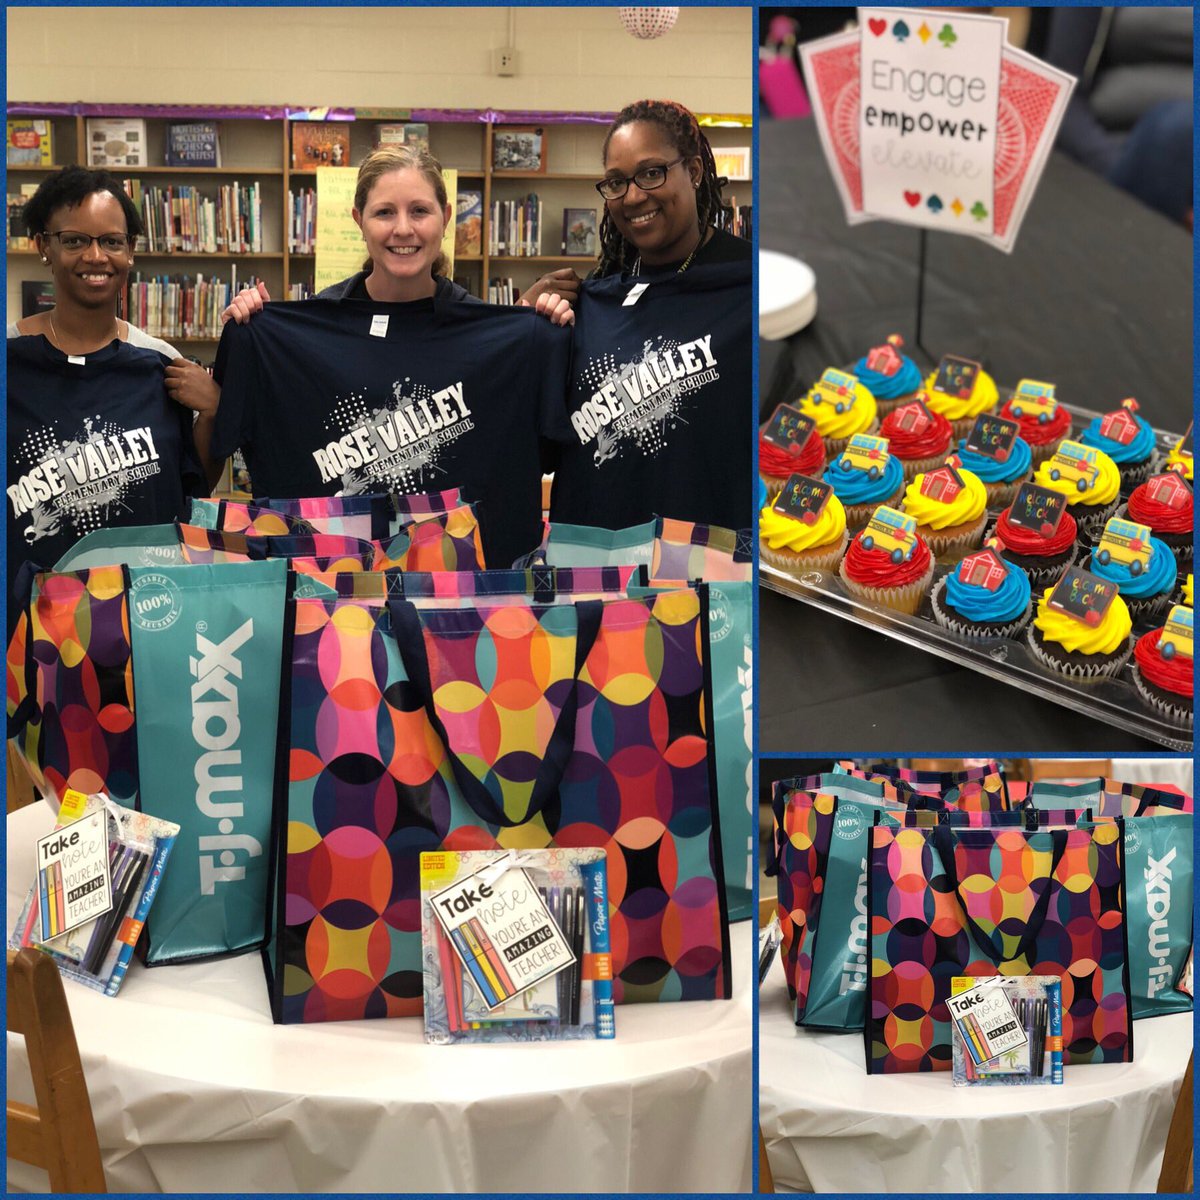 Celebrating our new teachers at our New Teacher Shower...They we’re surprised and grateful!!#NewTeachersRock #PGCPSProud